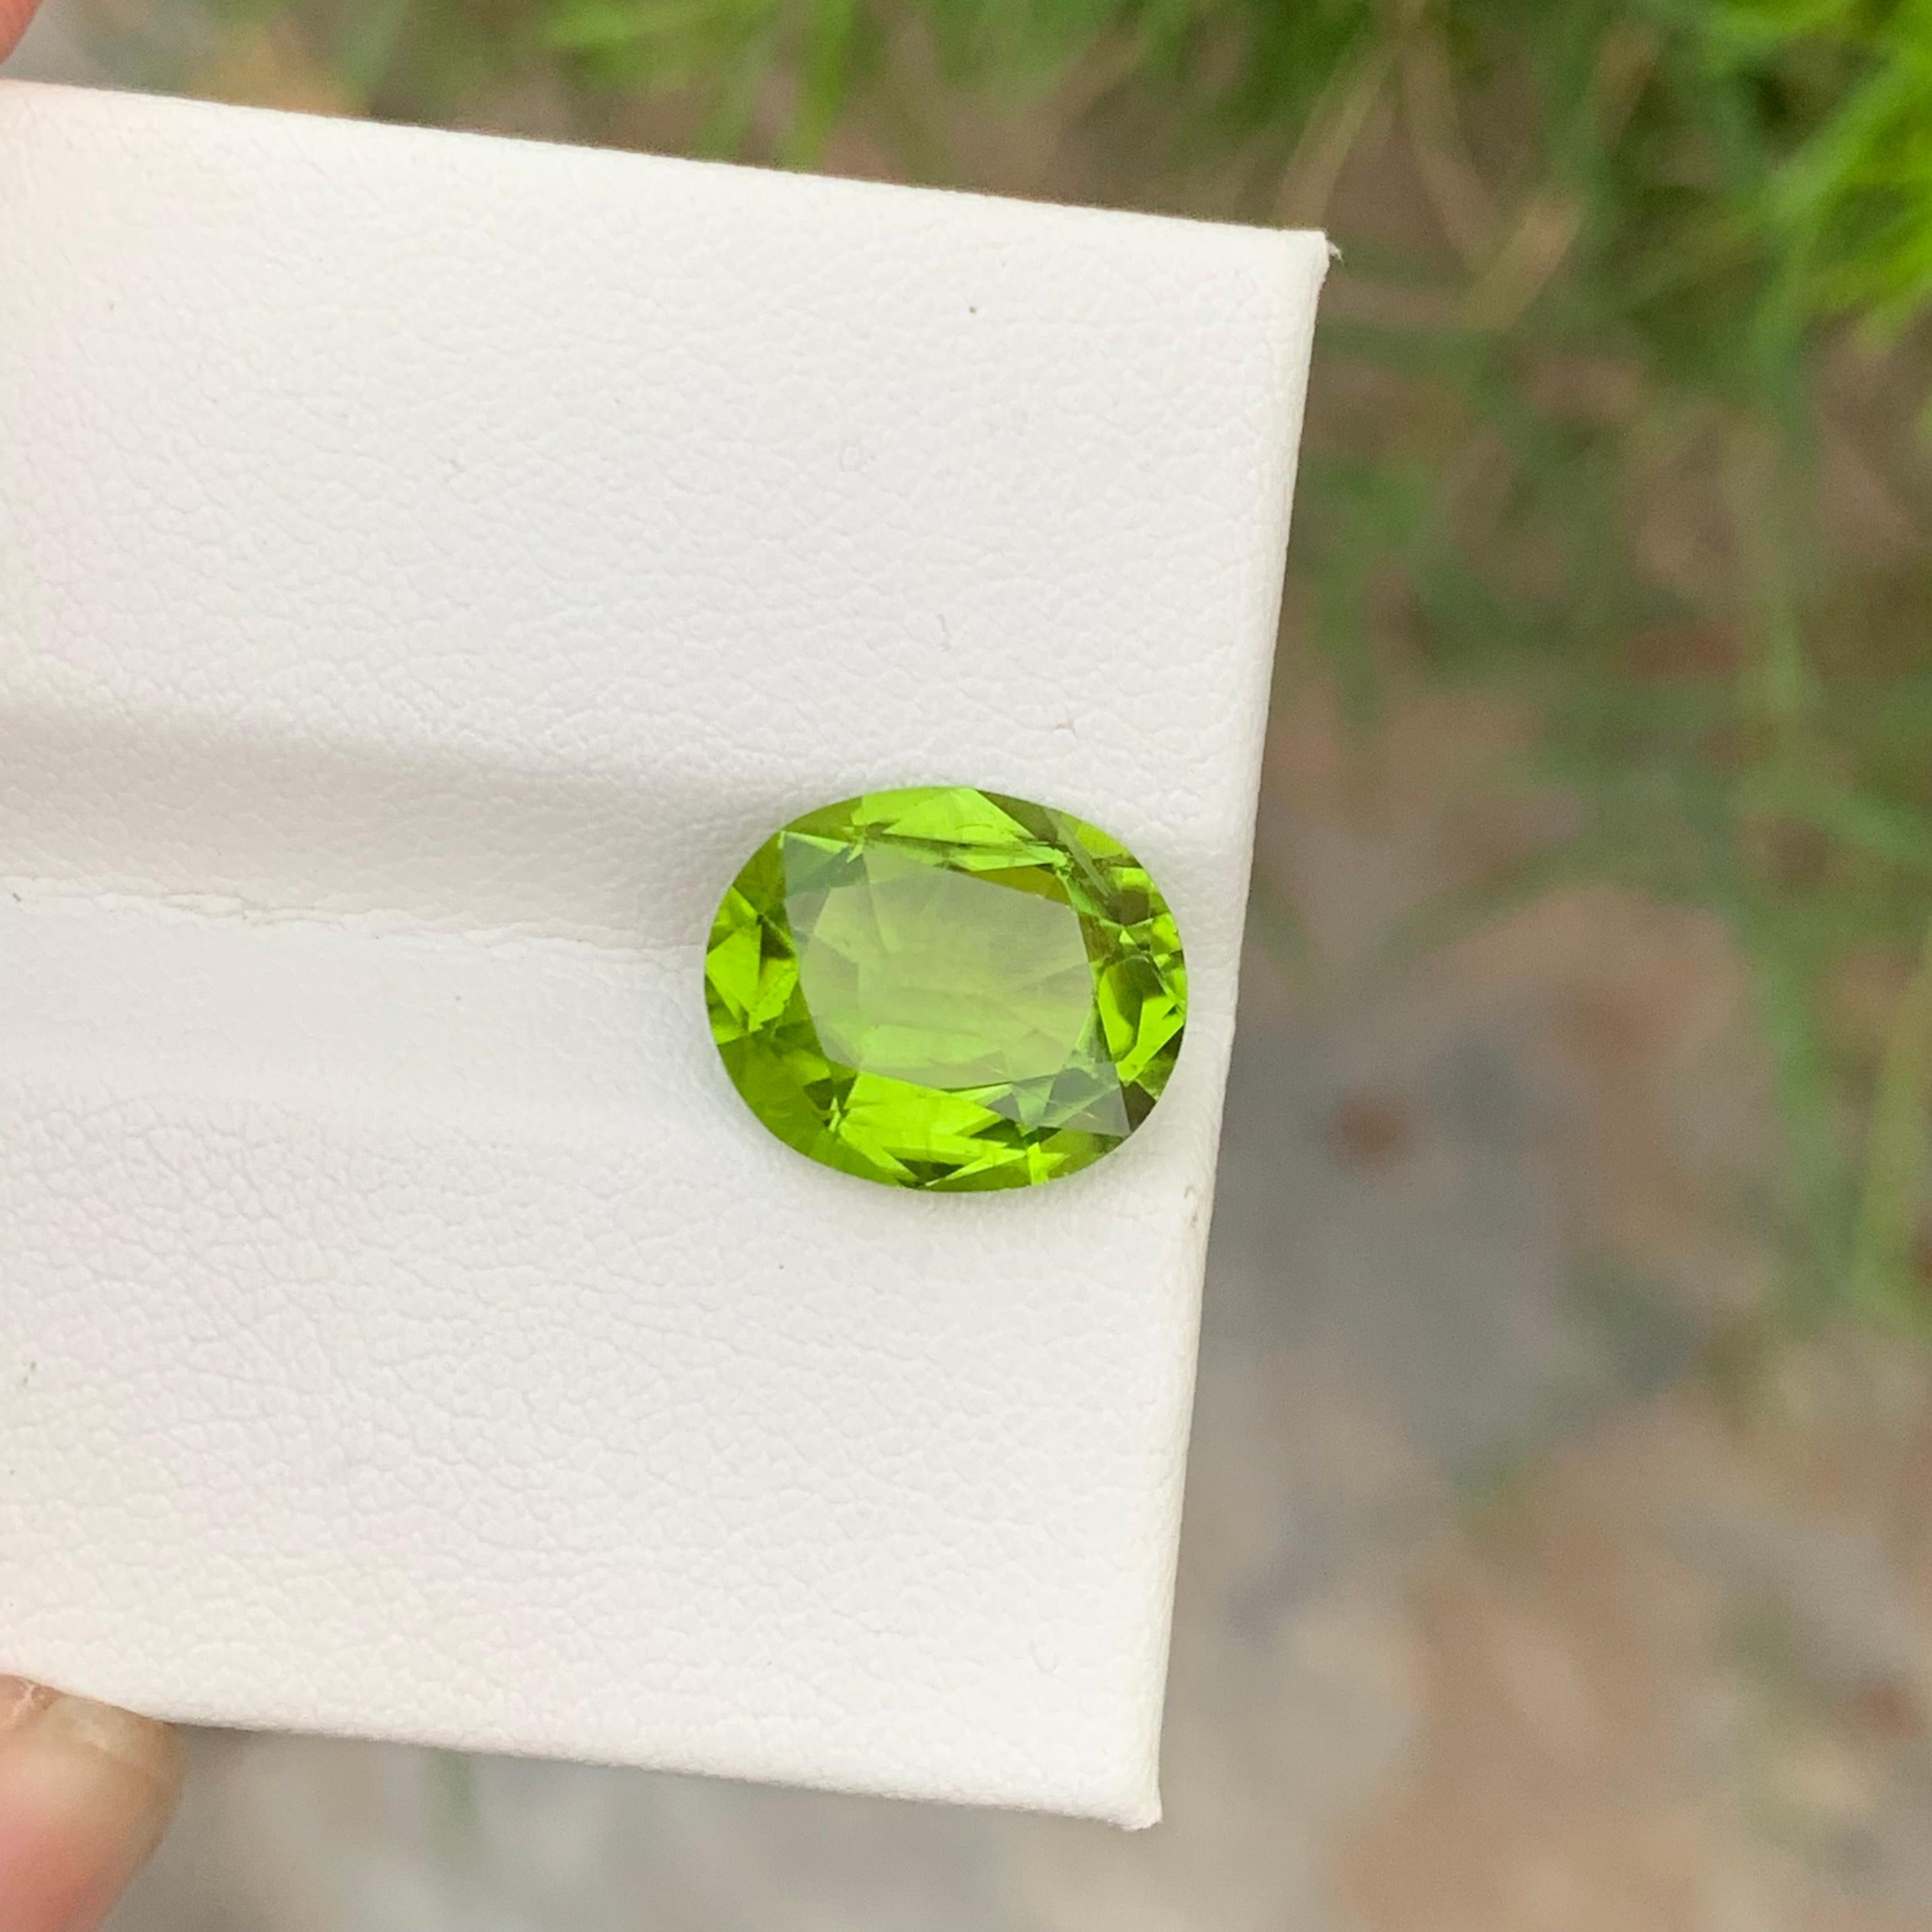 5.35 Carats Natural Apple Green Loose Peridot Gem From Suppart Valley Mine For Sale 6